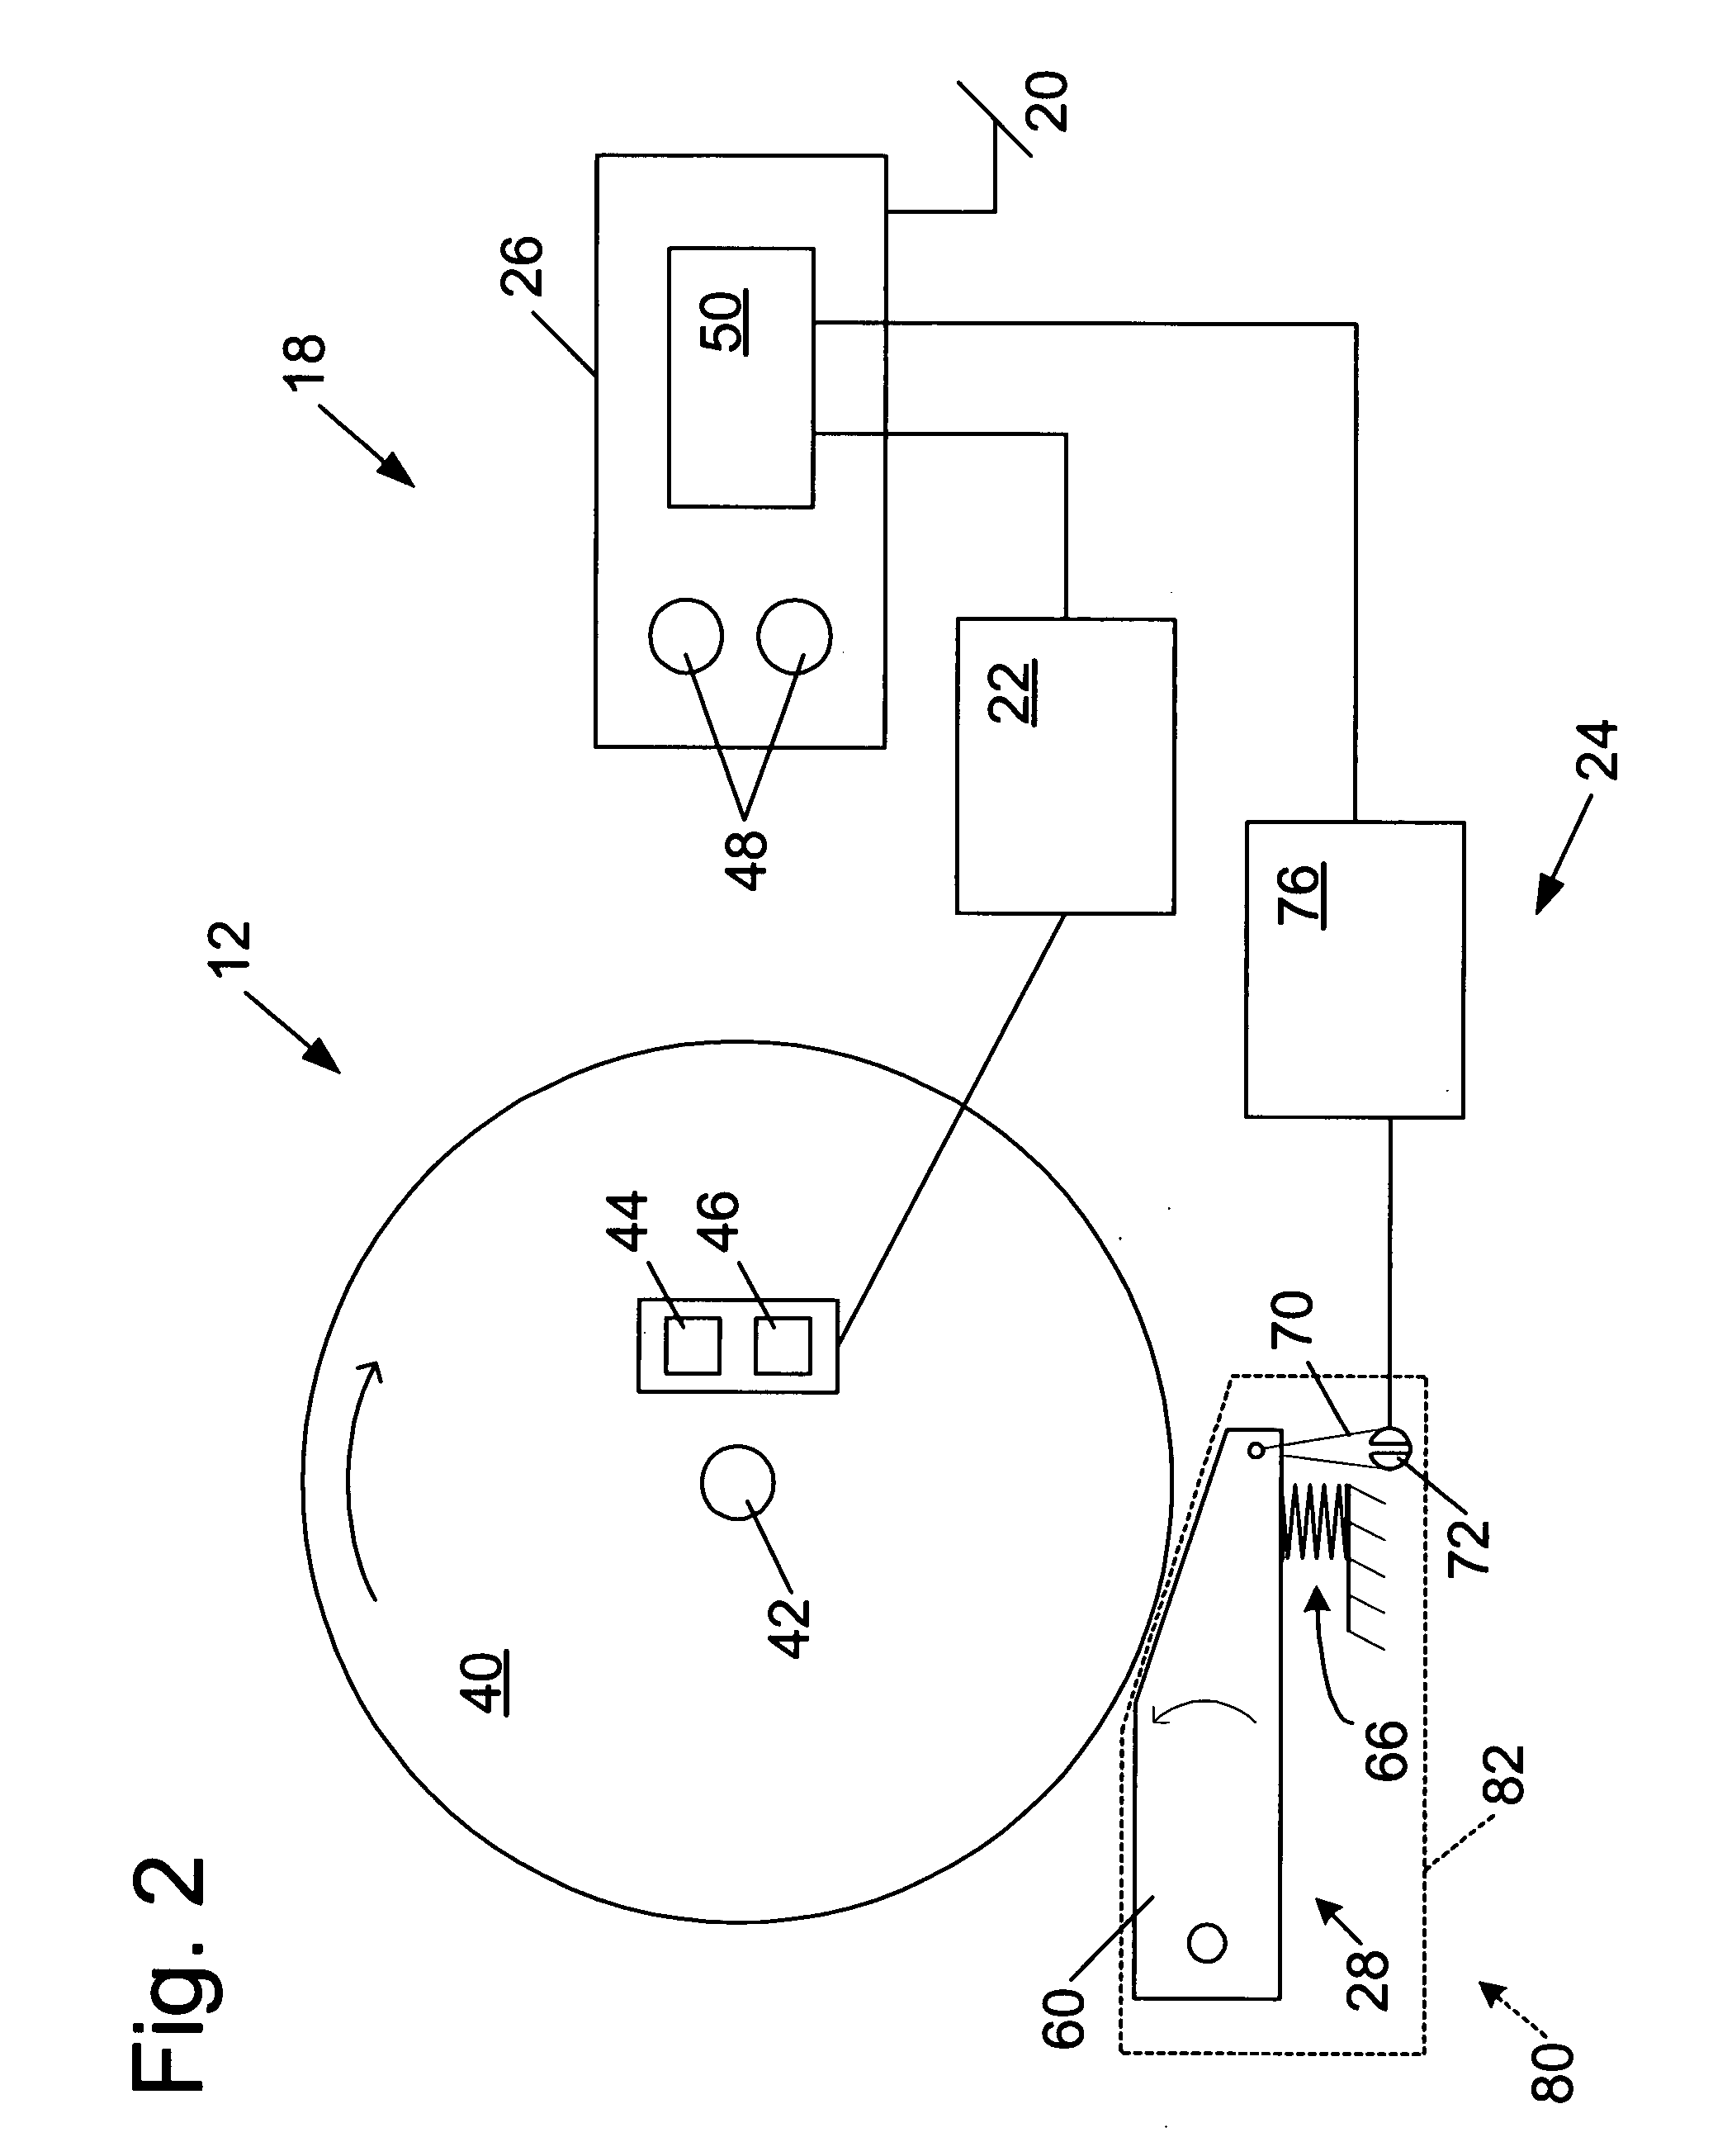 Detection system for power equipment